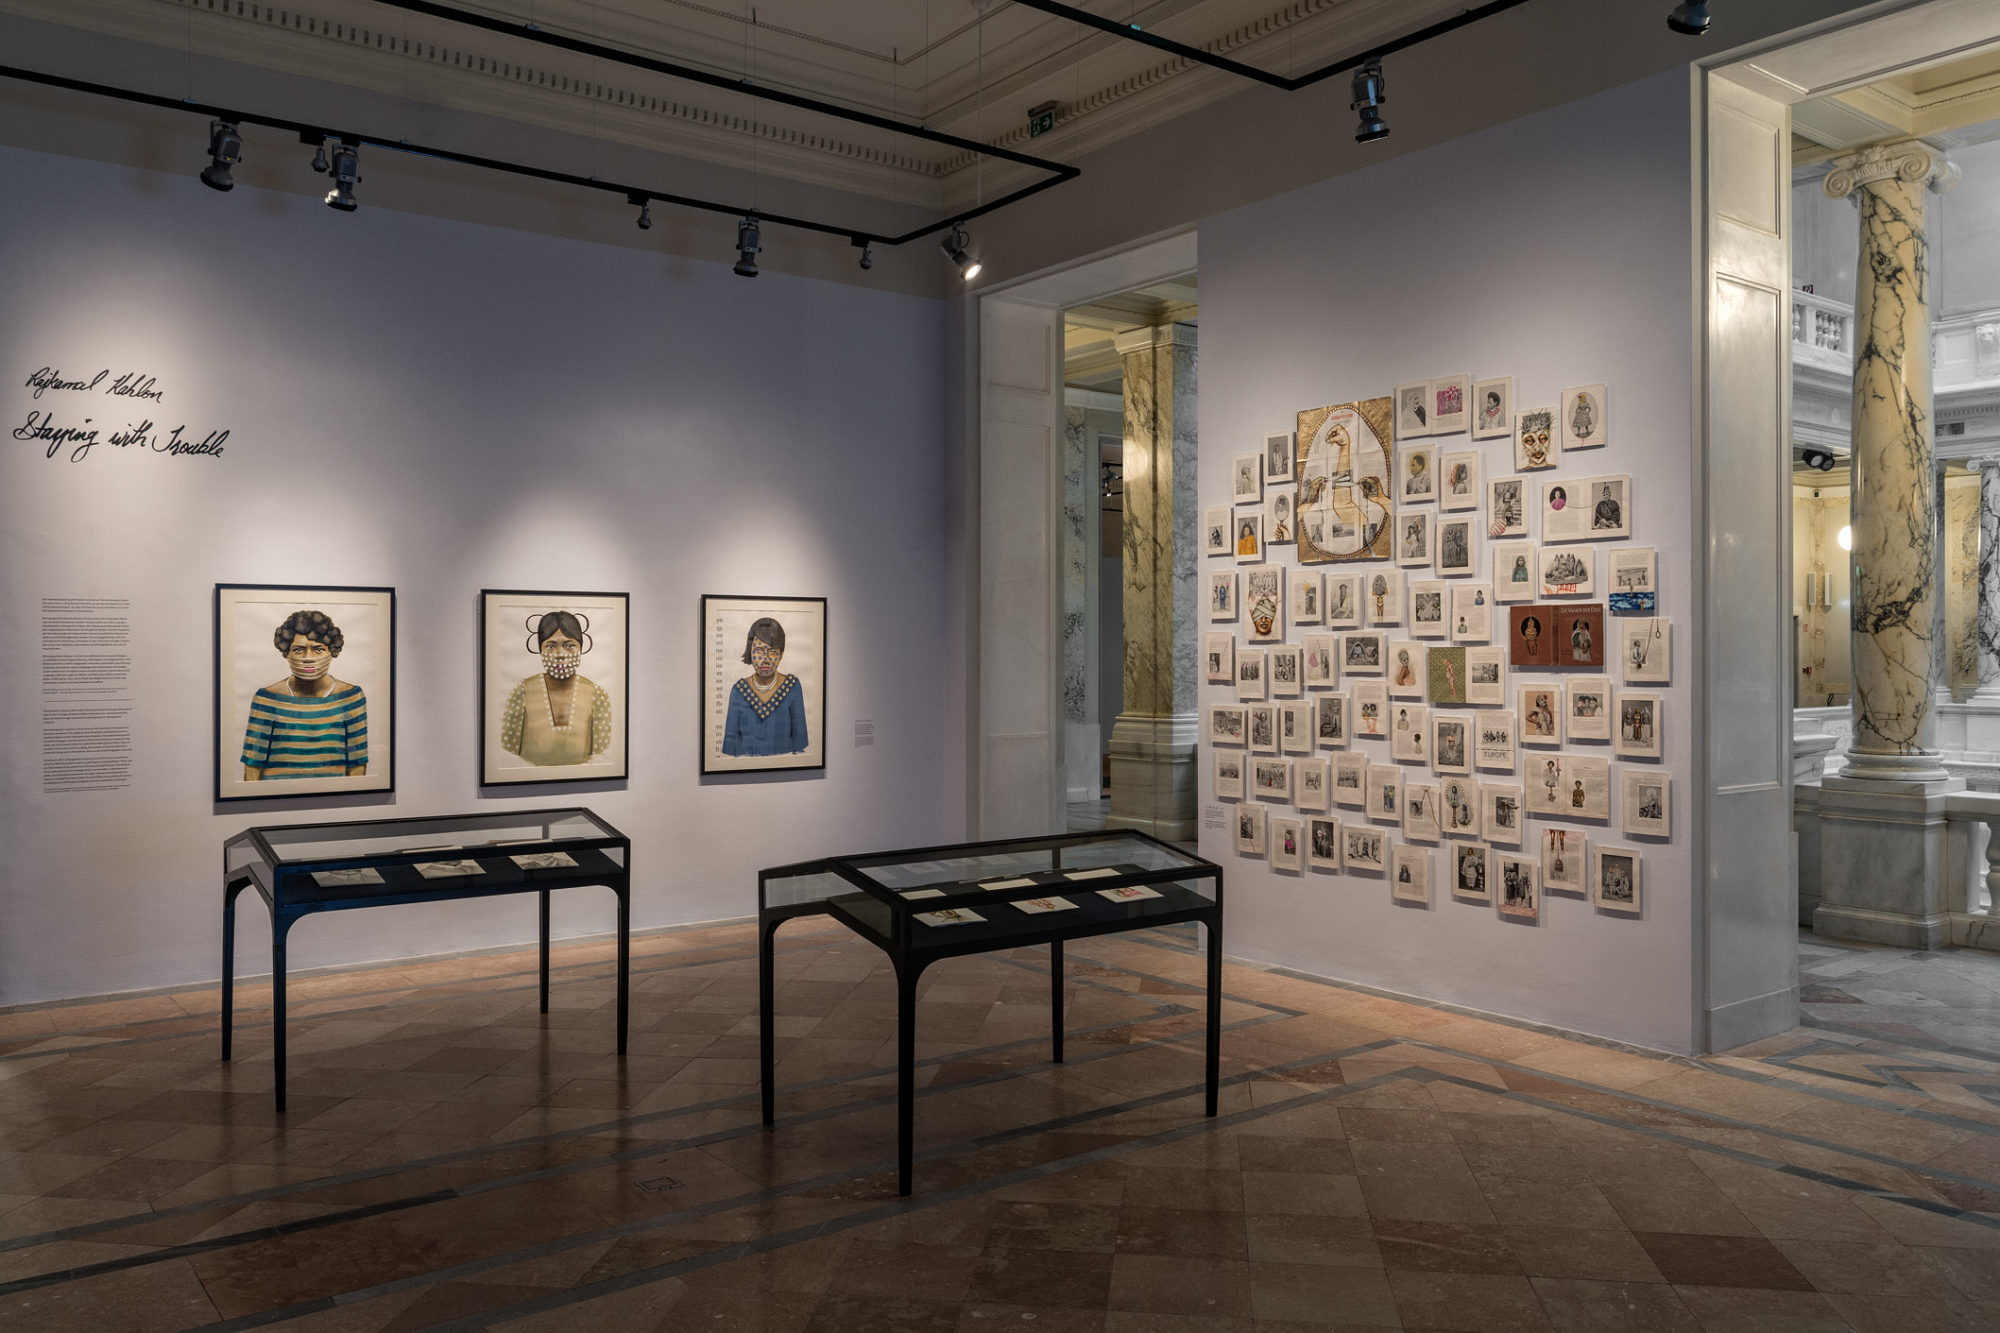 An installation view with many framed artworks on the walls